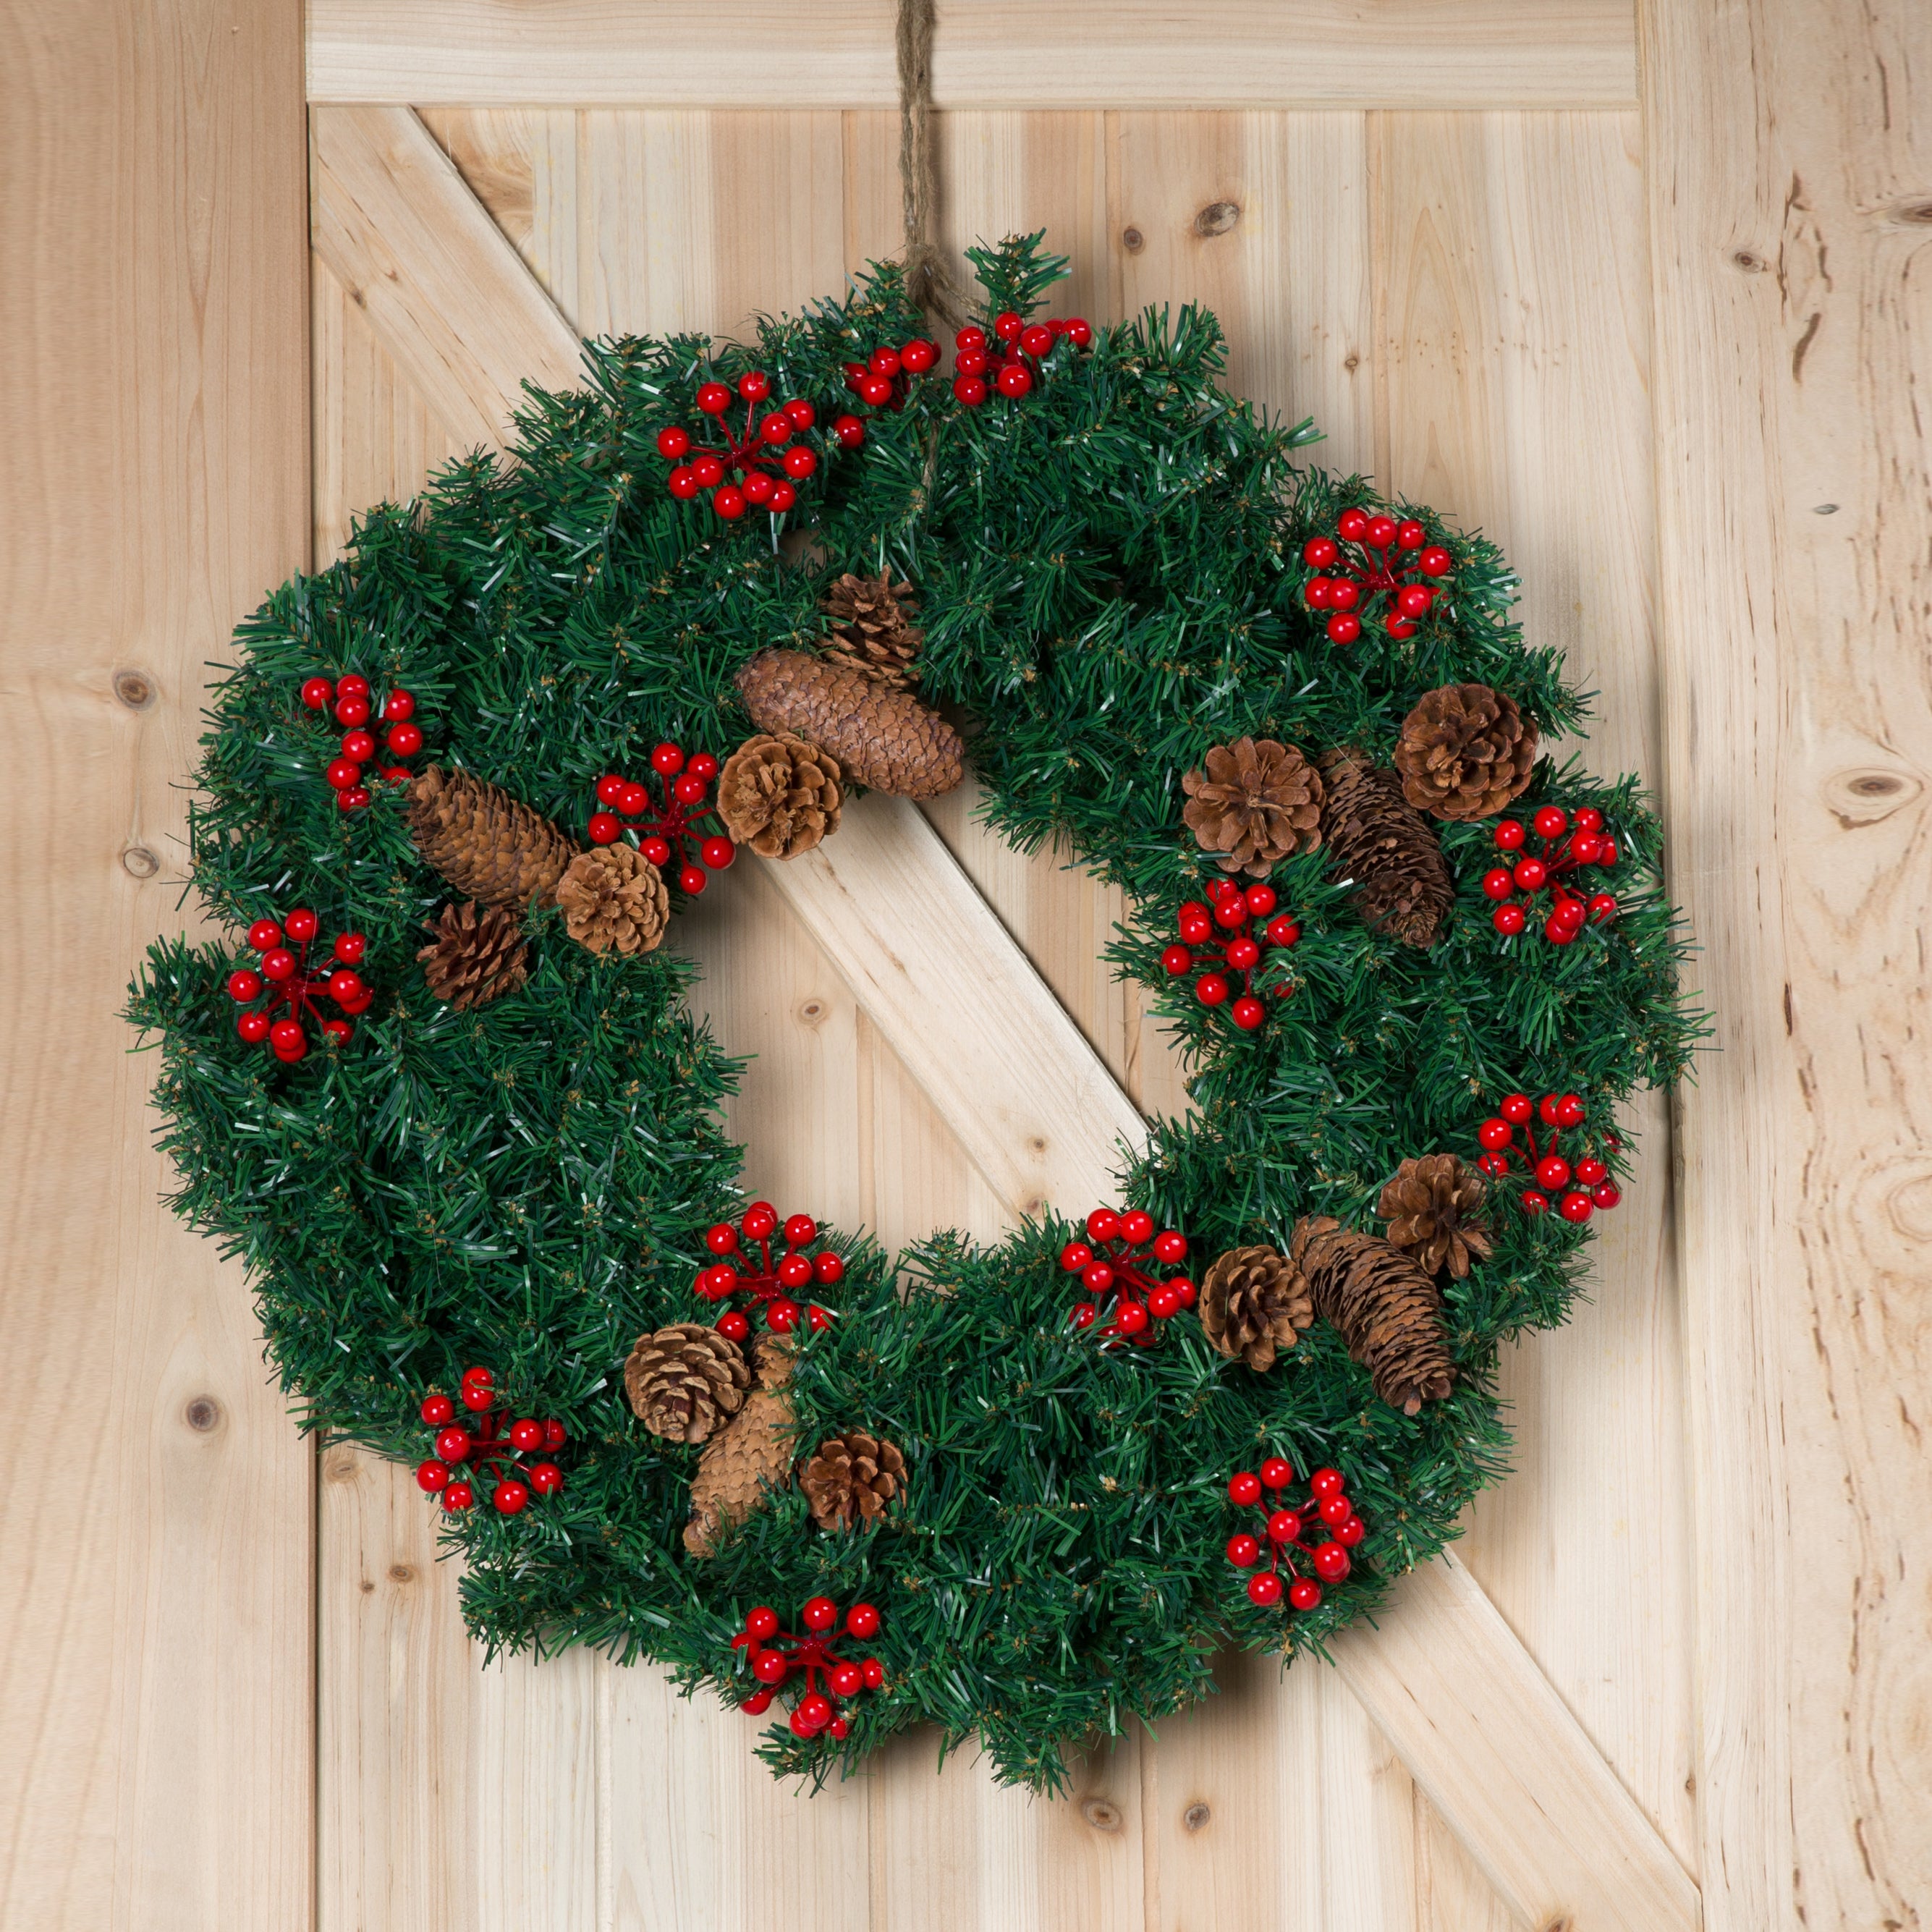 kate Christmas Wreaths Props 24 inches Winter Pine Garland for Front Door Photography